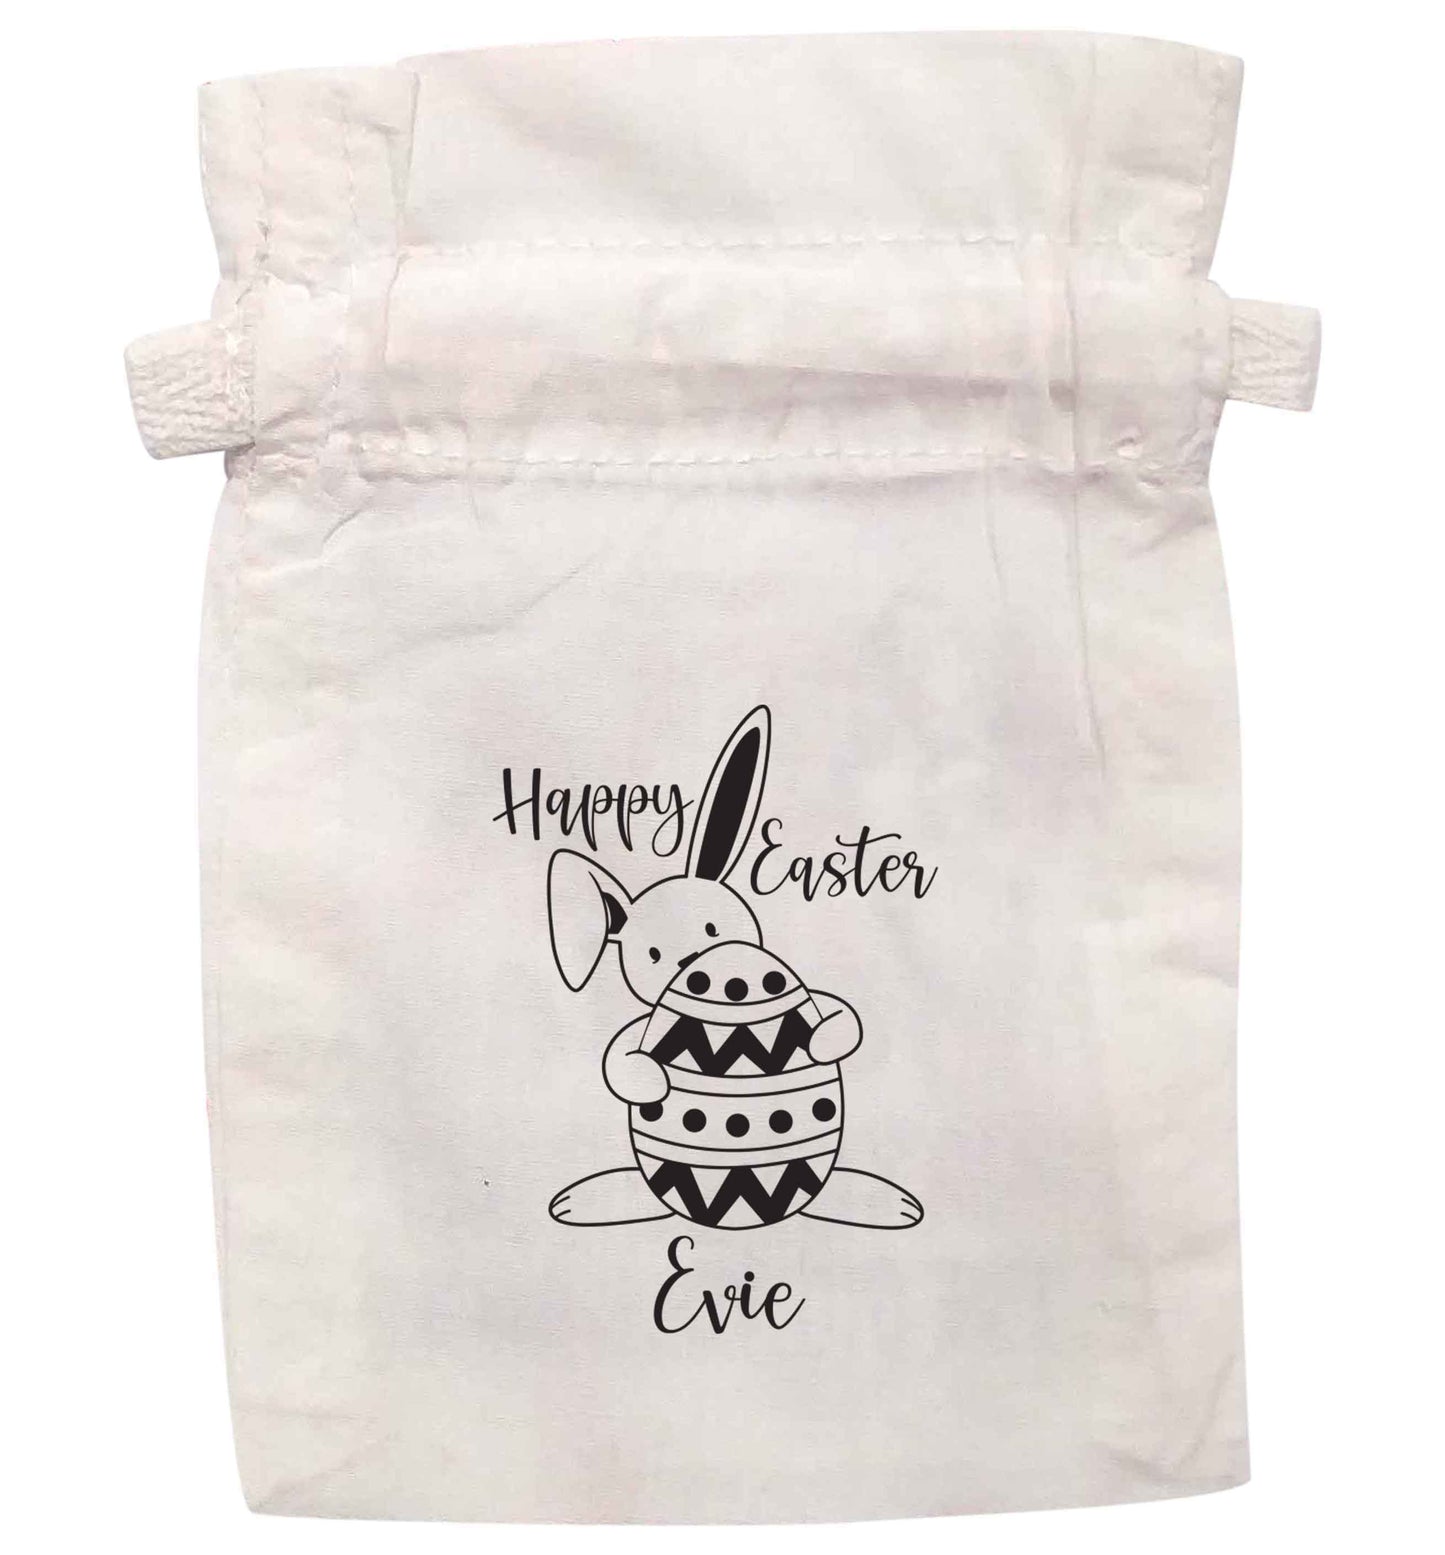 Happy Easter - personalised | XS - L | Pouch / Drawstring bag | Organic Cotton | Bulk discounts available!